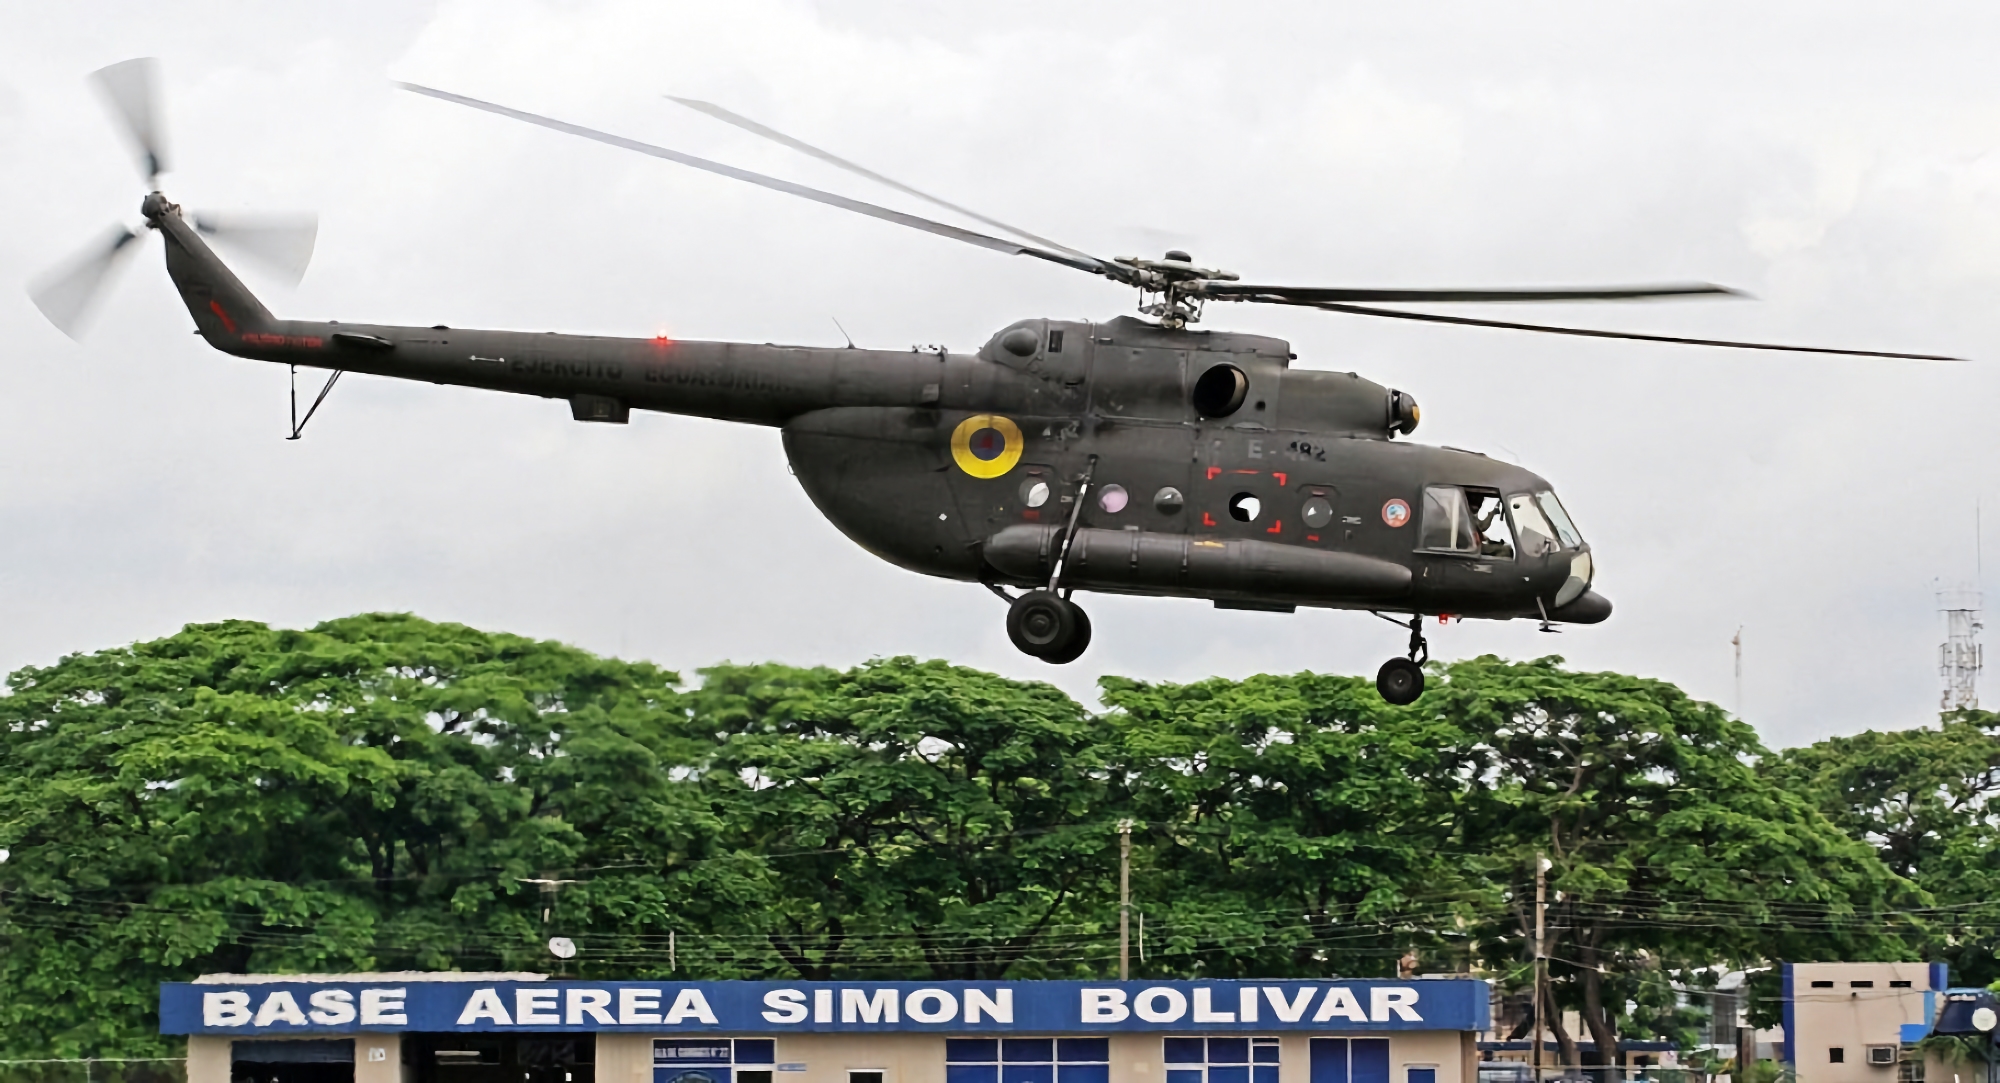 Source: Ecuador will transfer Mi-17 helicopters to Ukraine and in return will receive UH-60 Black Hawk helicopters from the U.S.